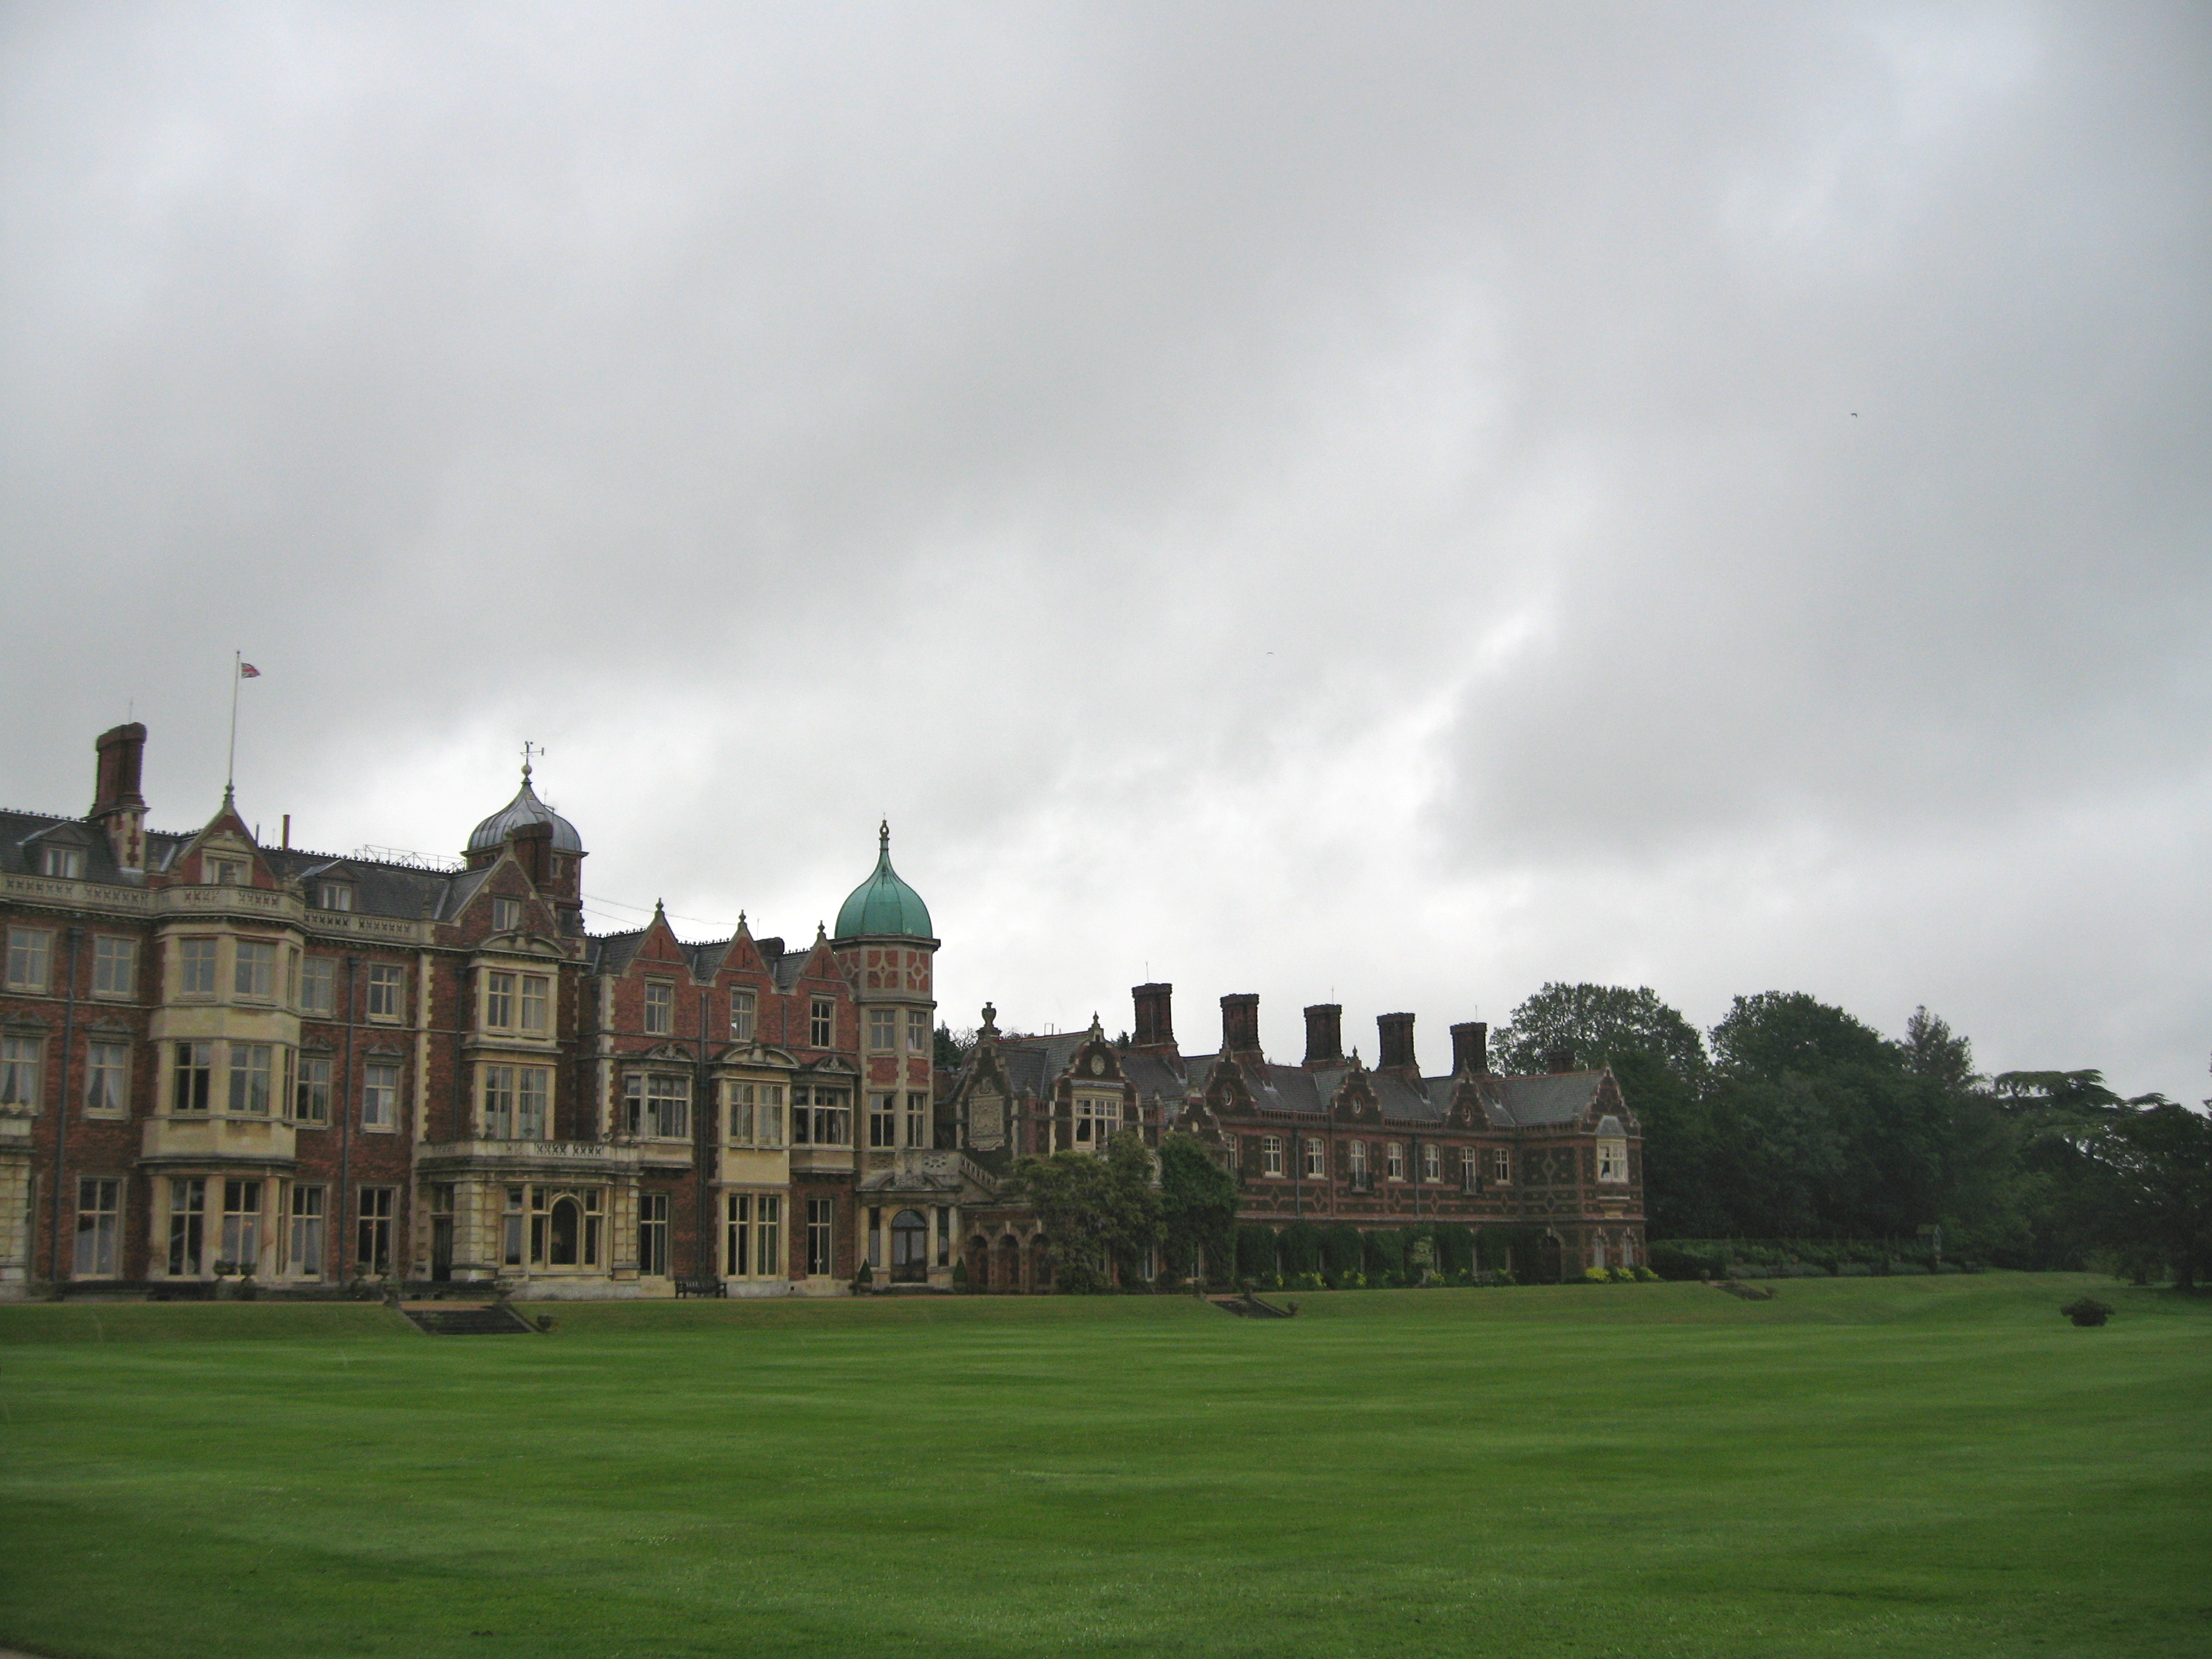 Sandringham House in June.  The grounds are as lovely as the house. Photo by me.